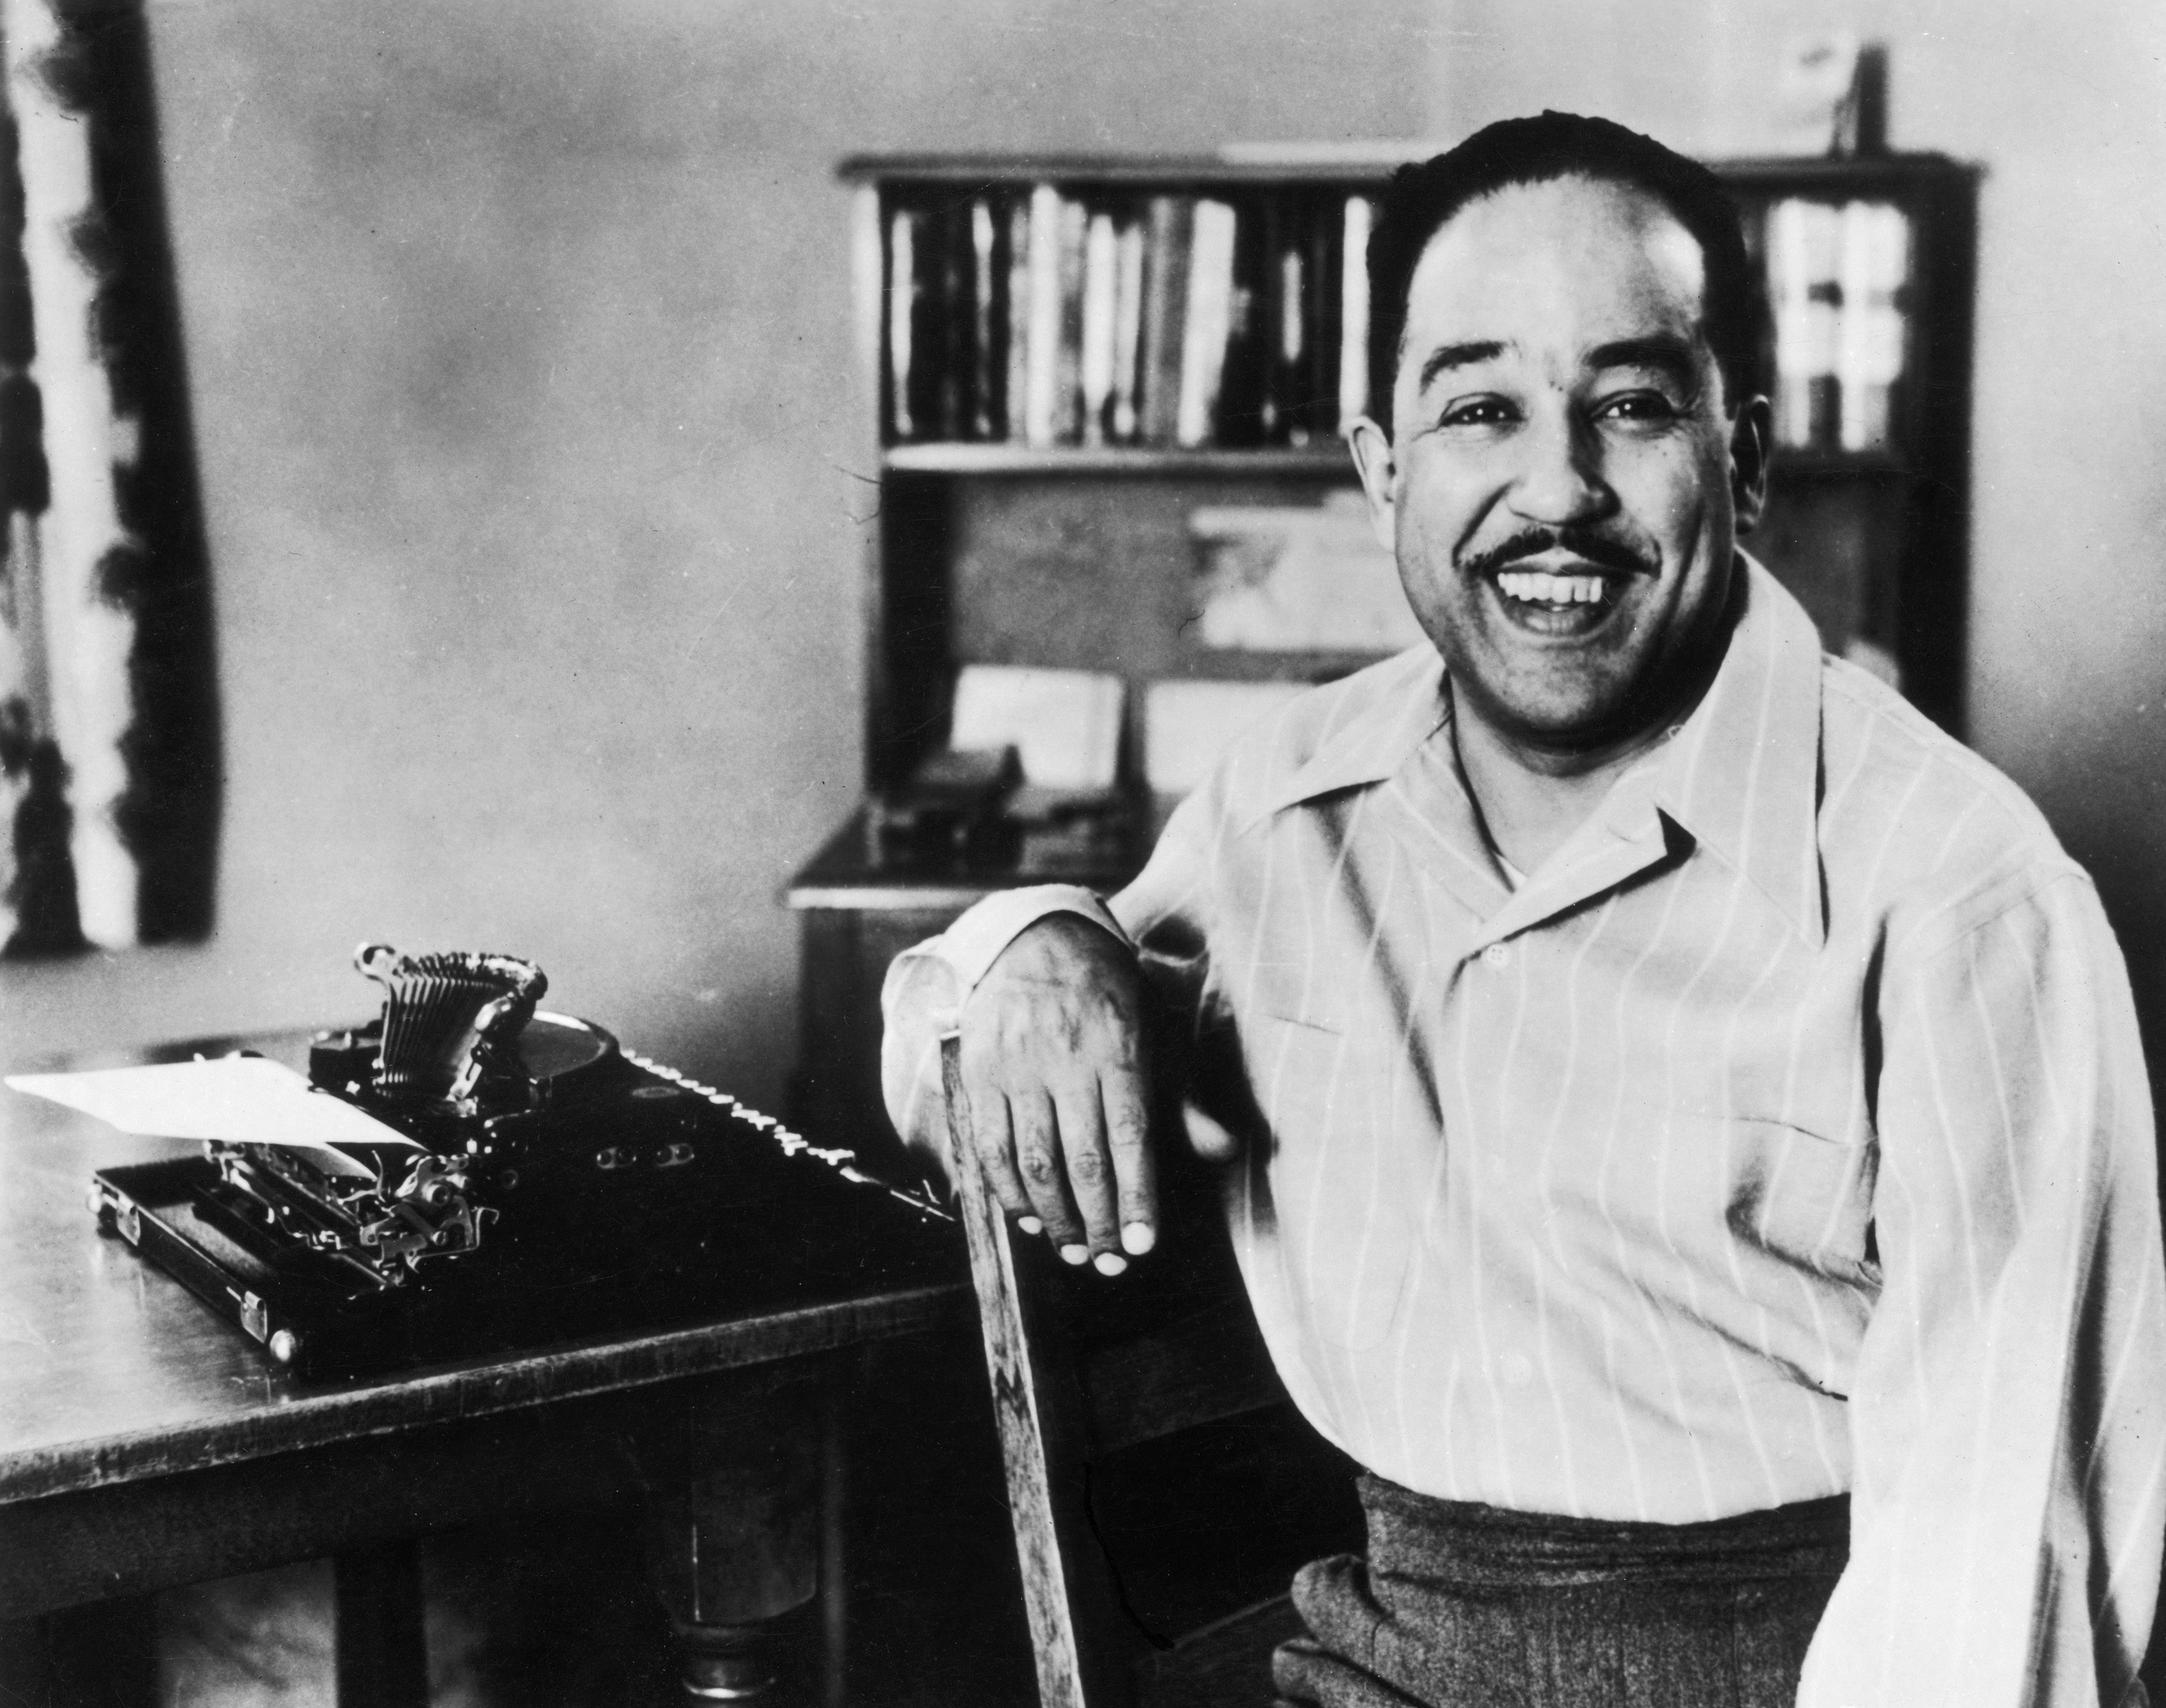 &nbsp;Langston Hughes&nbsp; - A pioneering poet, playwright and novelist of the Harlem Renaissance, Langston Hughes was also an early civil rights activist, using his art to promote Black pride (40 years before the Black Power movement) and rail against racial injustice.(Photo by Hulton Archive/Getty Images)